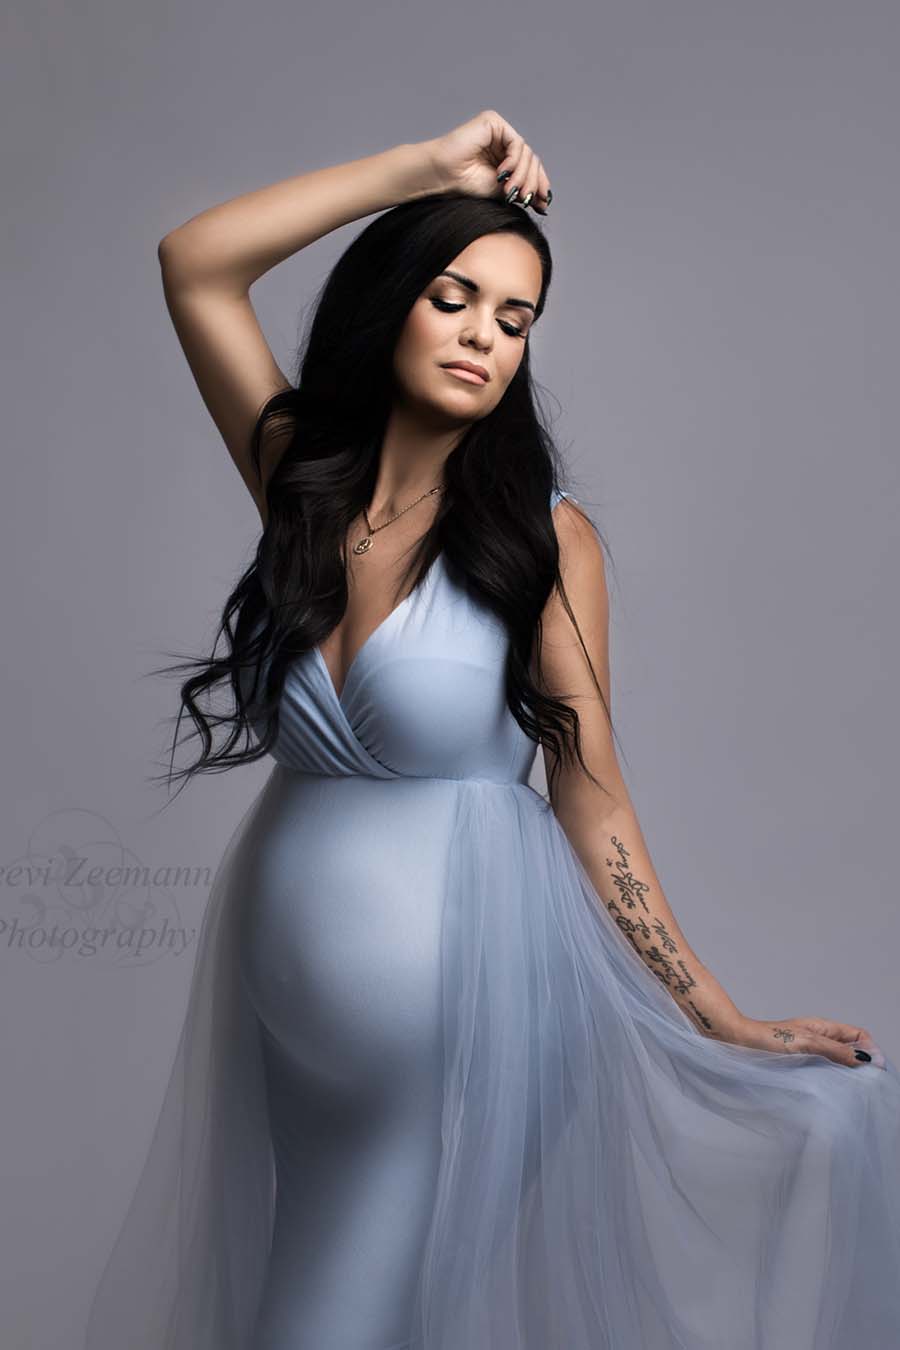 pregnant model wears a light blue dress without sleeves and a adjustable sweetheart top. she has her eyes closed and holds the tulle train from the dress with one hand while the other is resting above her head.